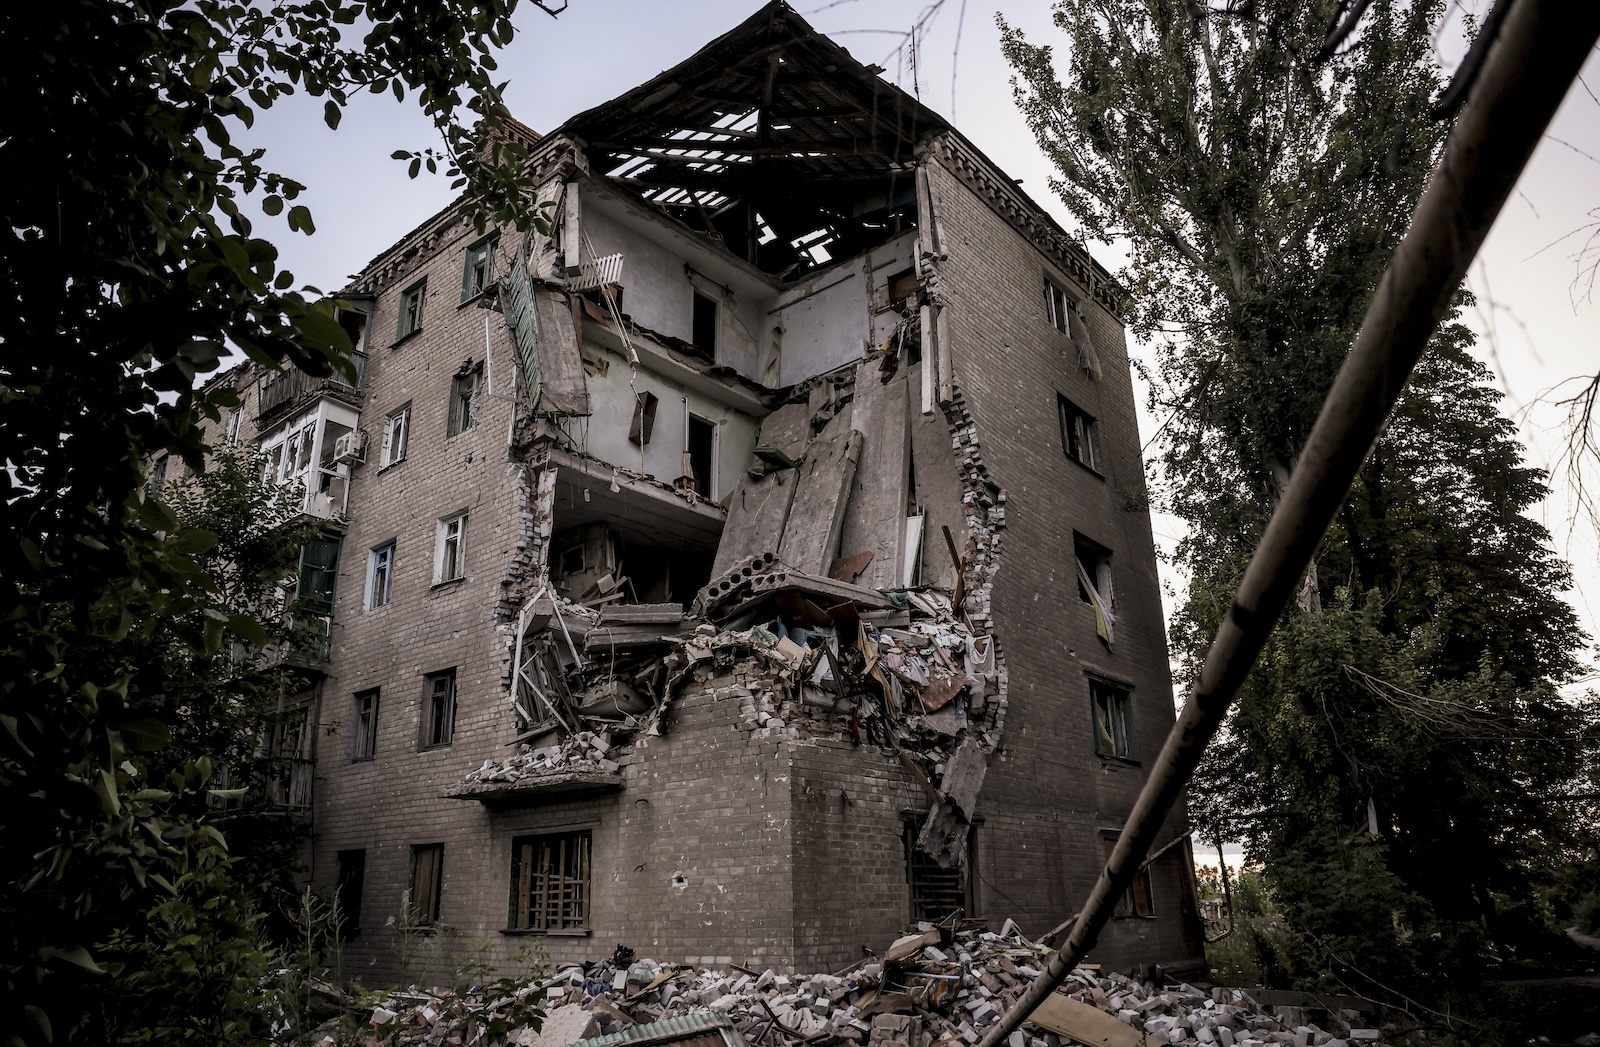 epa11436457 A handout photo made available by the Ukrainian Army shows a residential building damaged by shelling in the city of Chasiv Yar, Ukraine, 25 June 2024 amid the Russian invasion. Russian troops entered Ukrainian territory on 24 February 2022, starting a conflict that has provoked destruction and a humanitarian crisis.  EPA/UKRAINIAN ARMY / OLEG PETRASIUK  / HANDOUT  HANDOUT EDITORIAL USE ONLY/NO SALES HANDOUT EDITORIAL USE ONLY/NO SALES